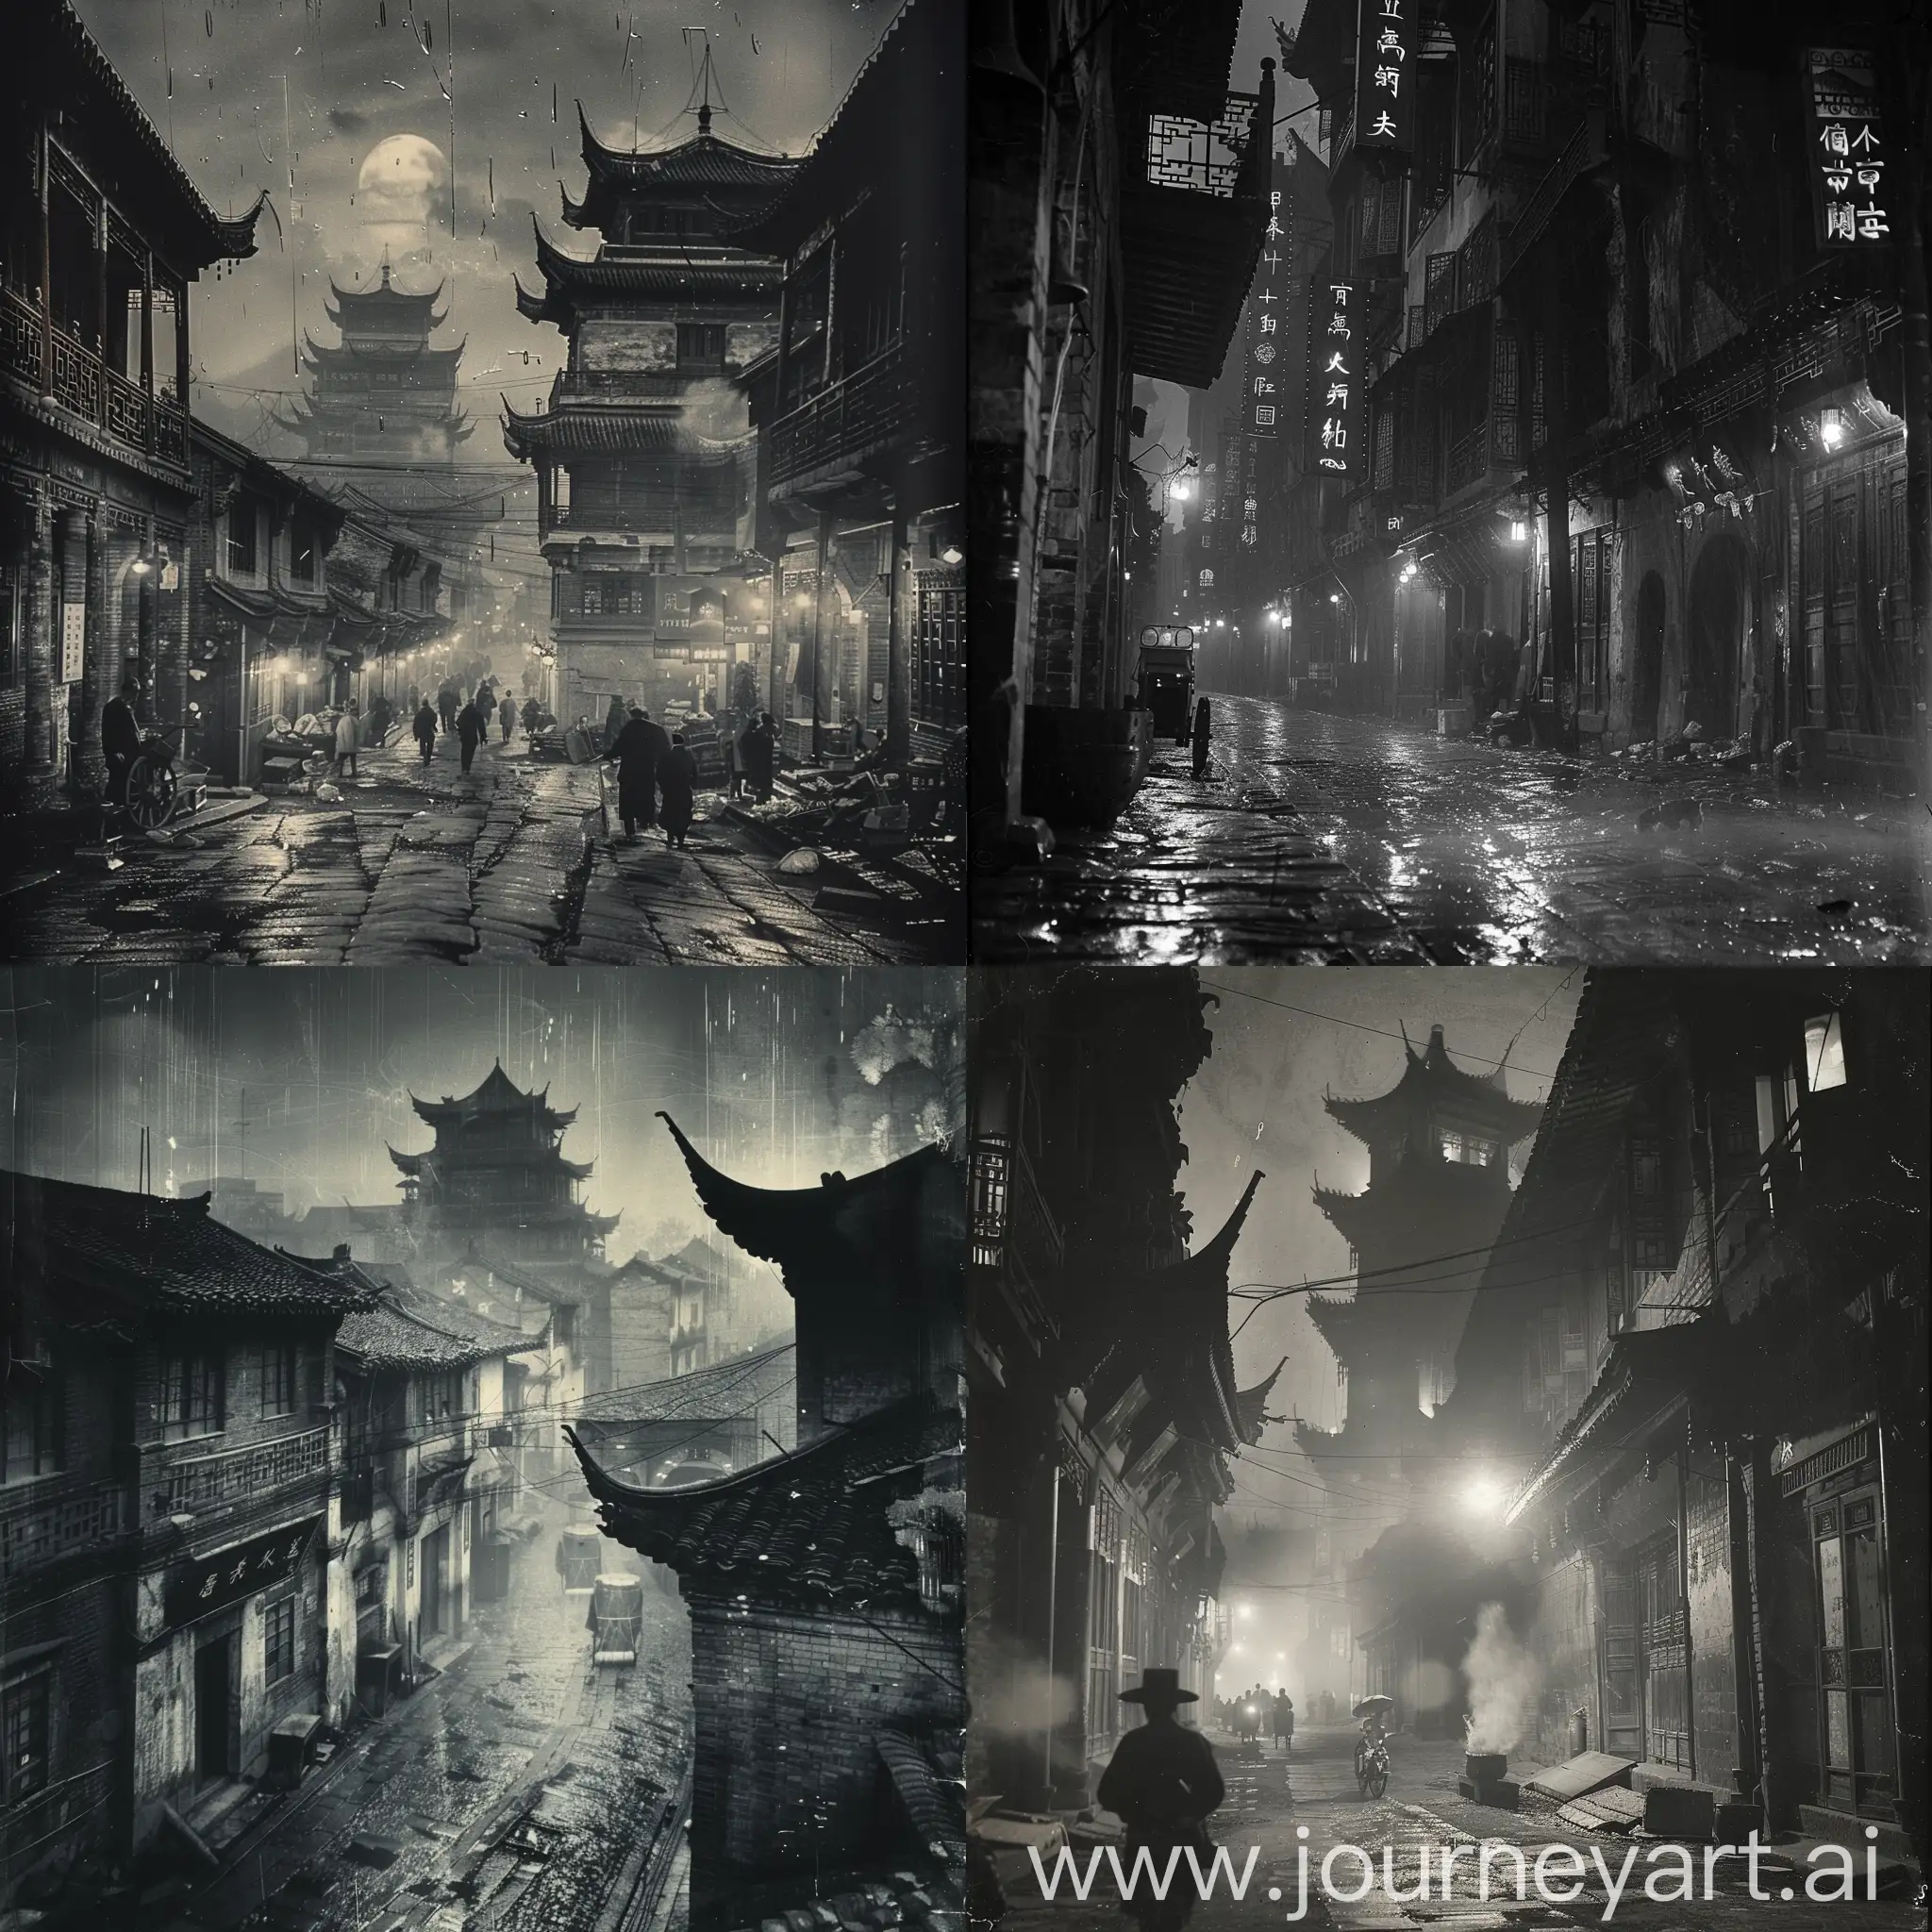 Mysterious-Midnight-Streets-of-Ancient-China-Grainy-1950s-Photograph